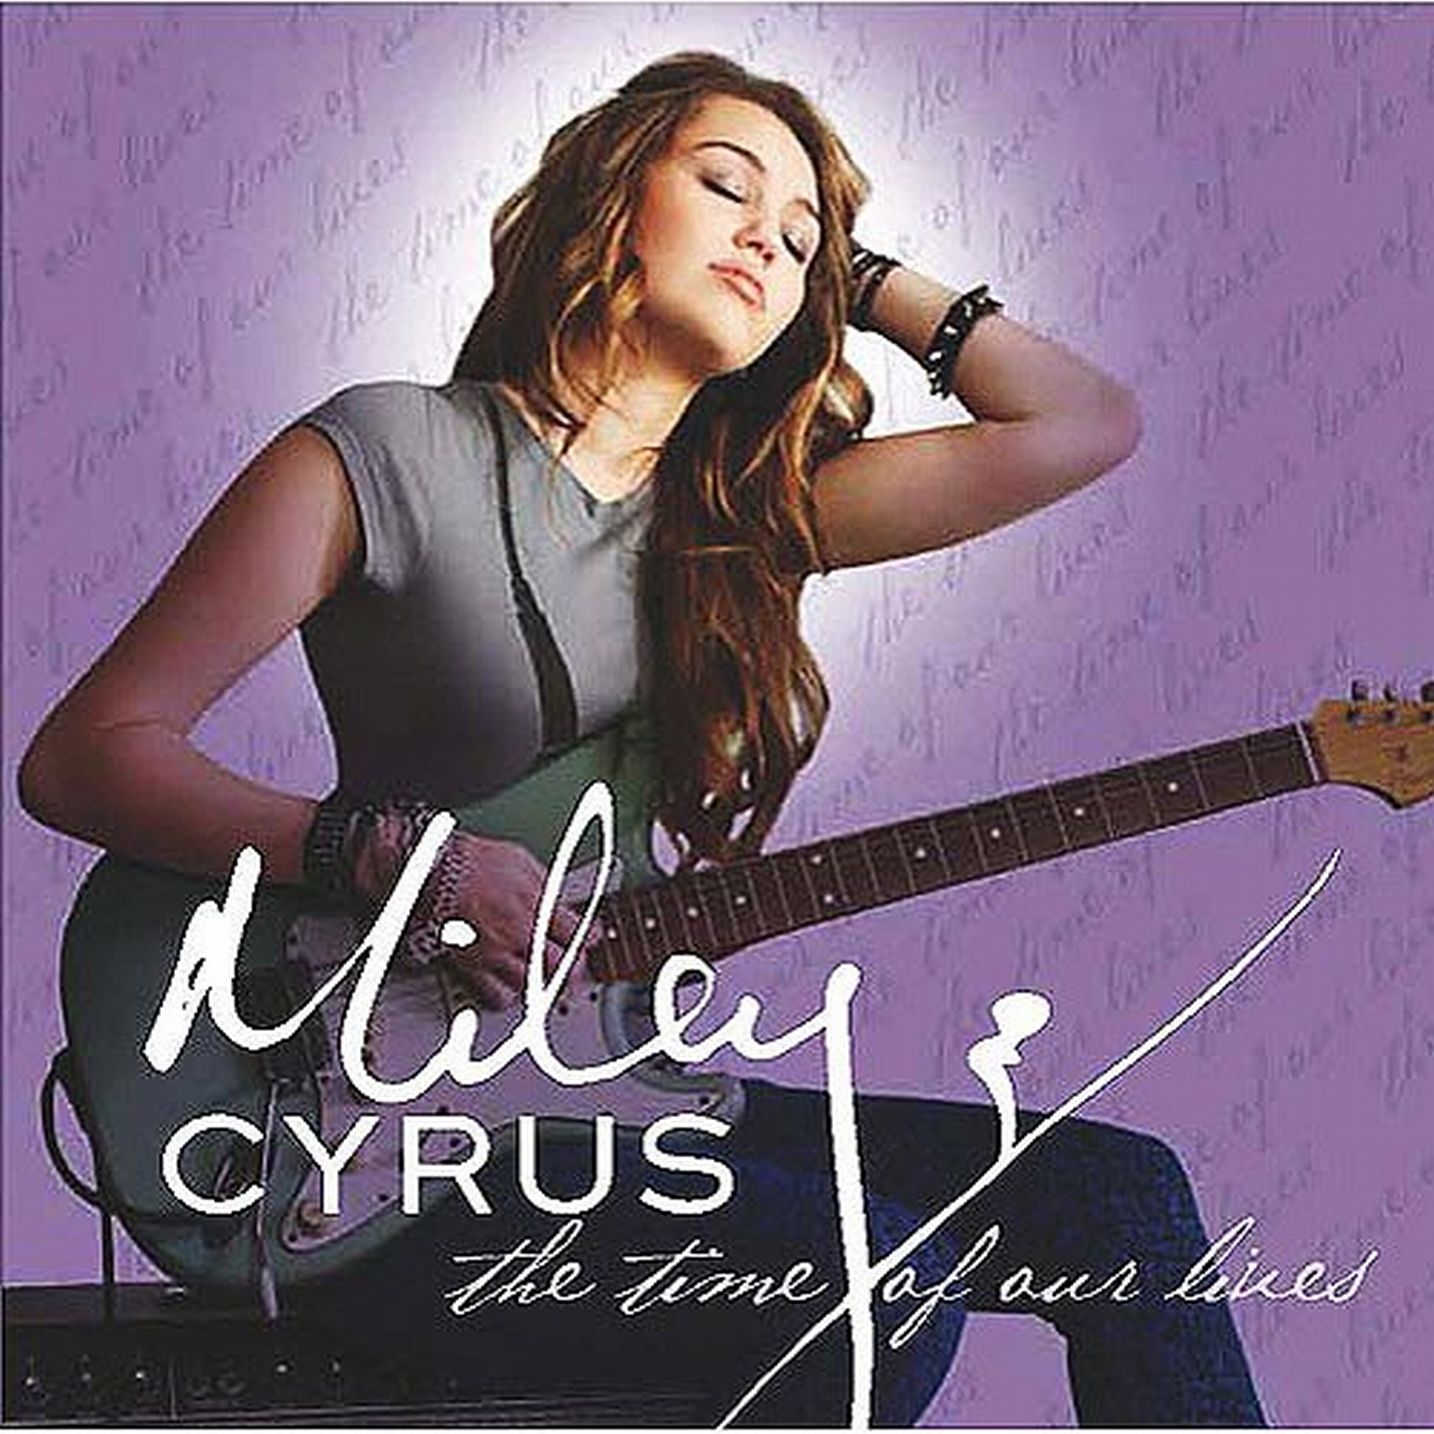 00_miley_cyrus_the_time_of_our_lives__ep__2009_scan-1258222570.jpg